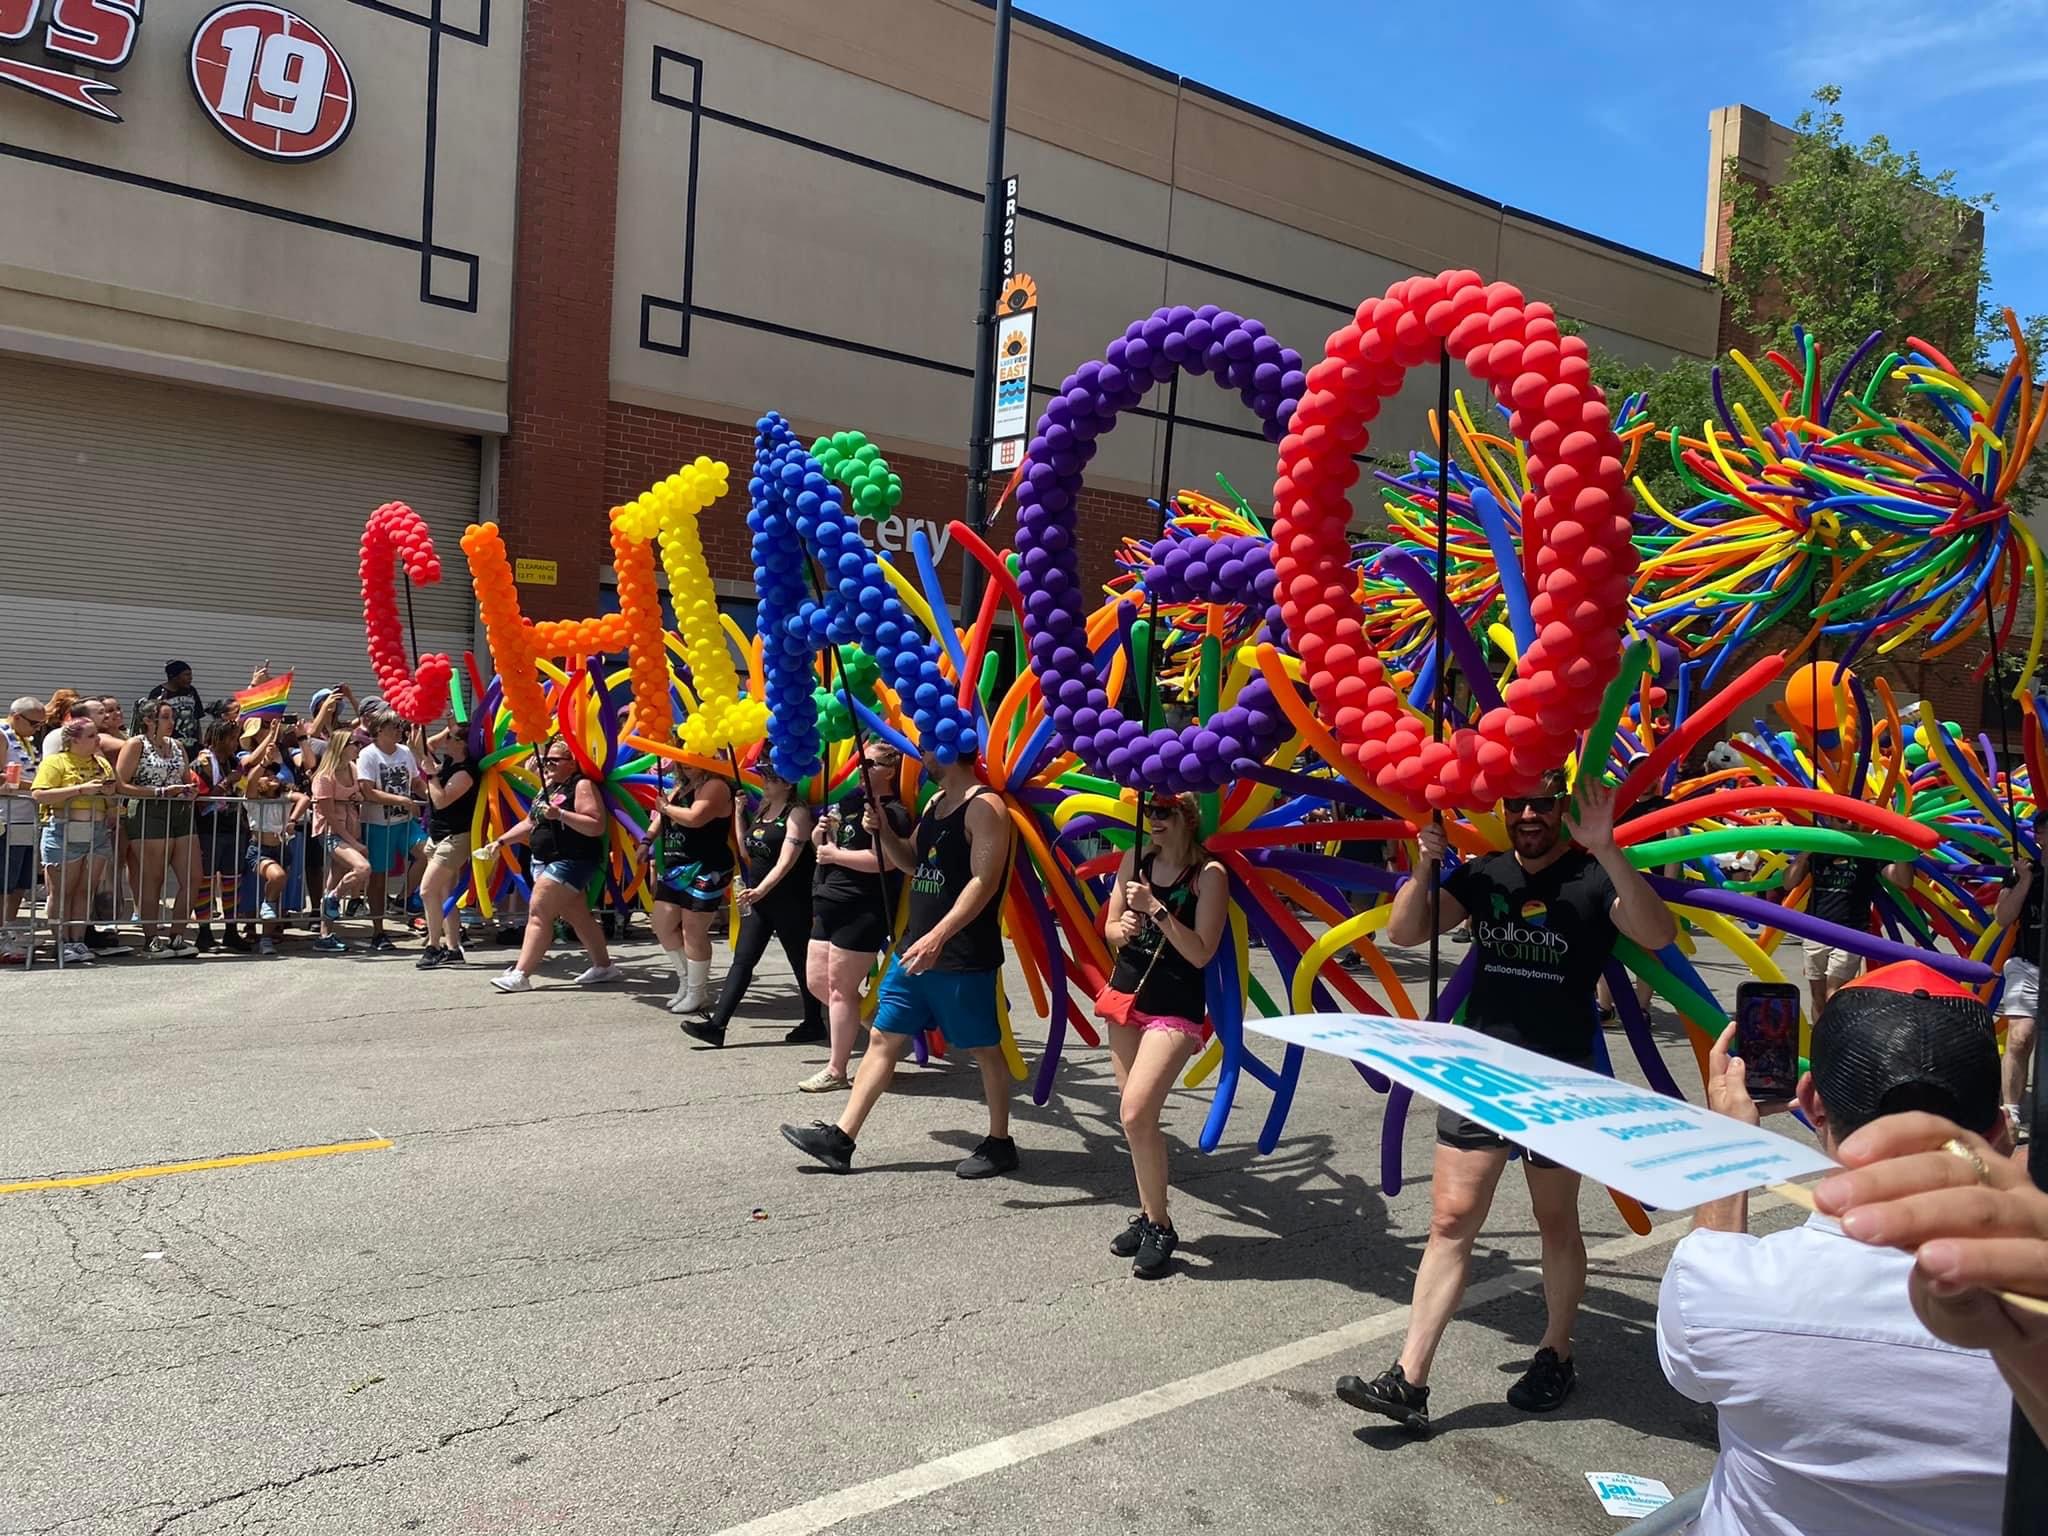 Judge’s Reception in Celebration of Chicago’s 51st Annual Gay Pride Parade – June 26, 2022